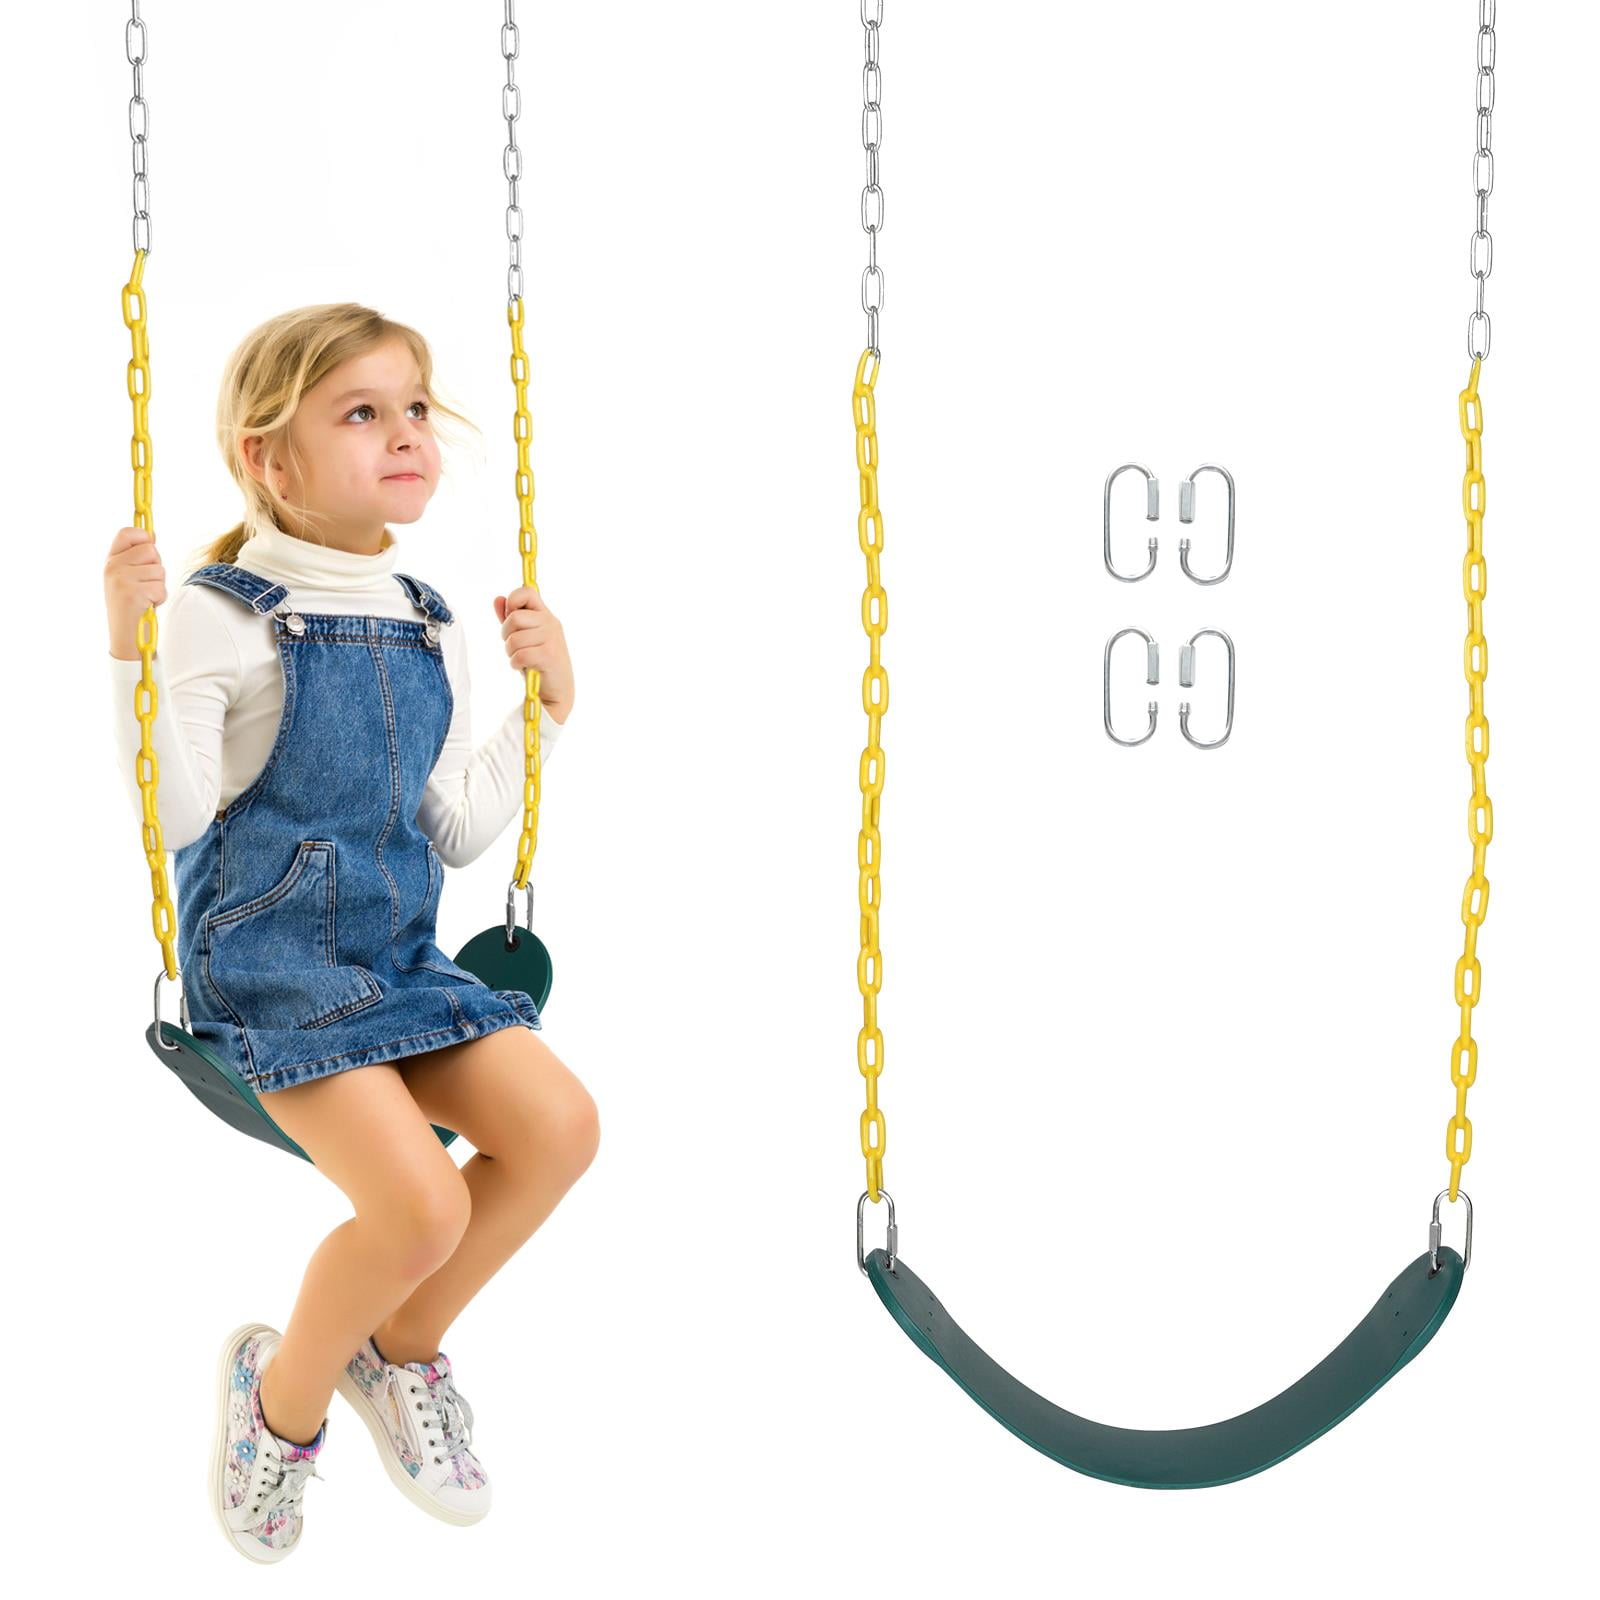 Playground Accessories Set of 2 Replacement Coated Heavy Duty Swing Seat Chain 